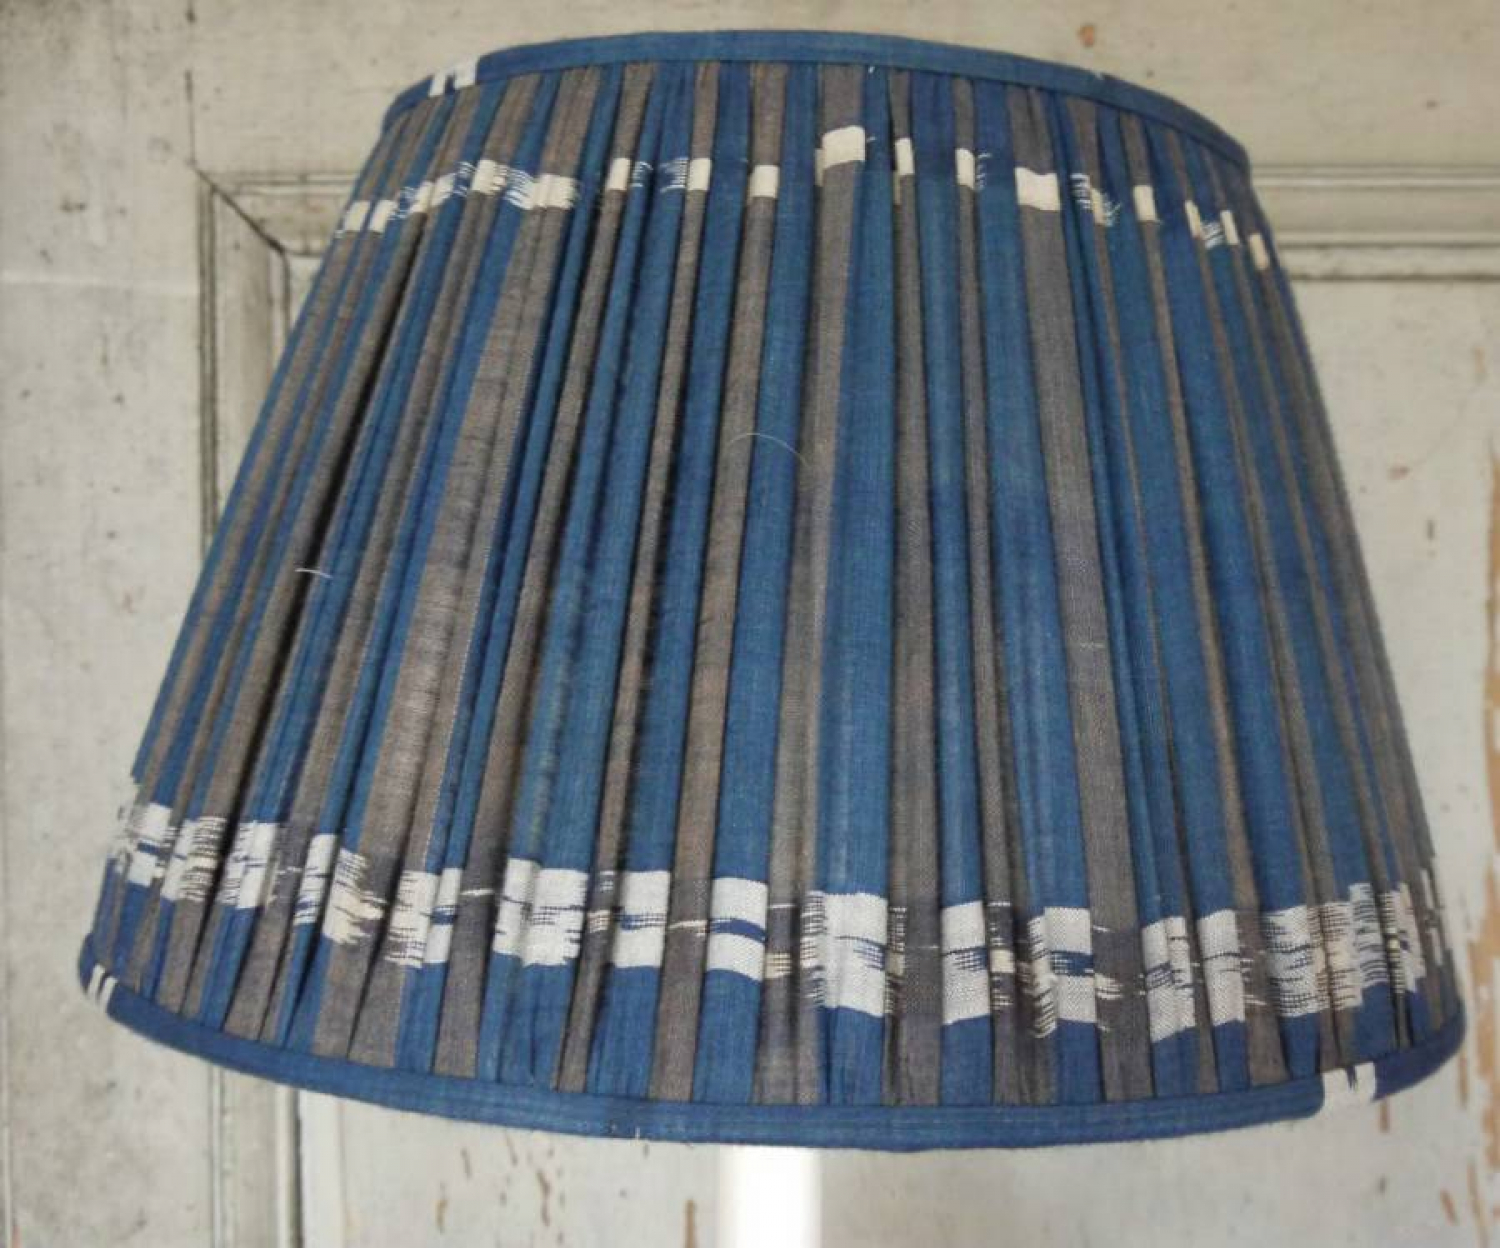 Flamme lampshade